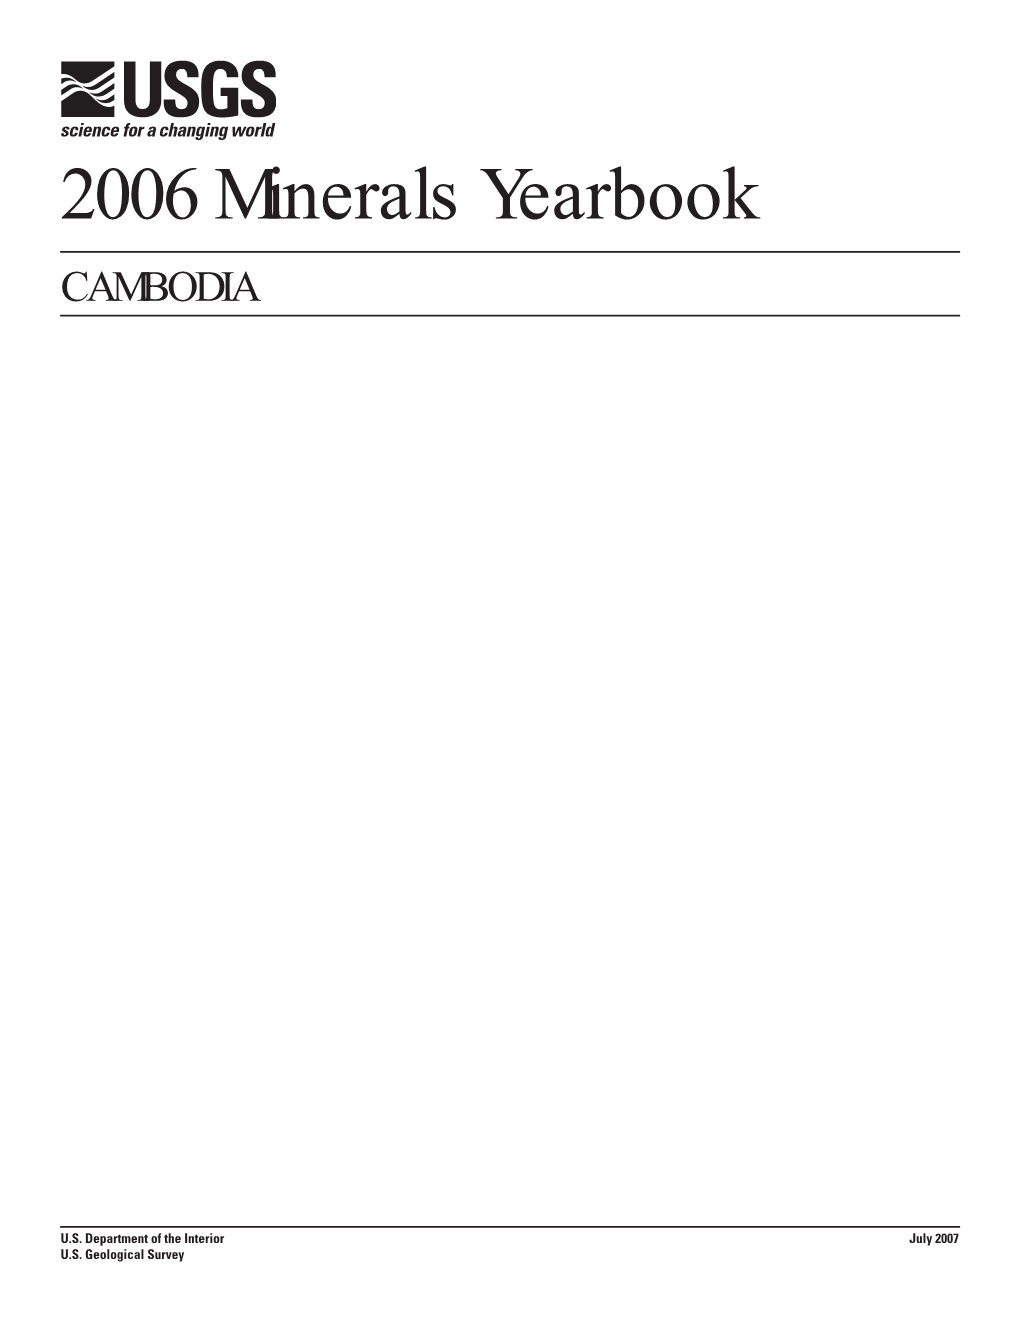 The Mineral Industry of Cambodia in 2006